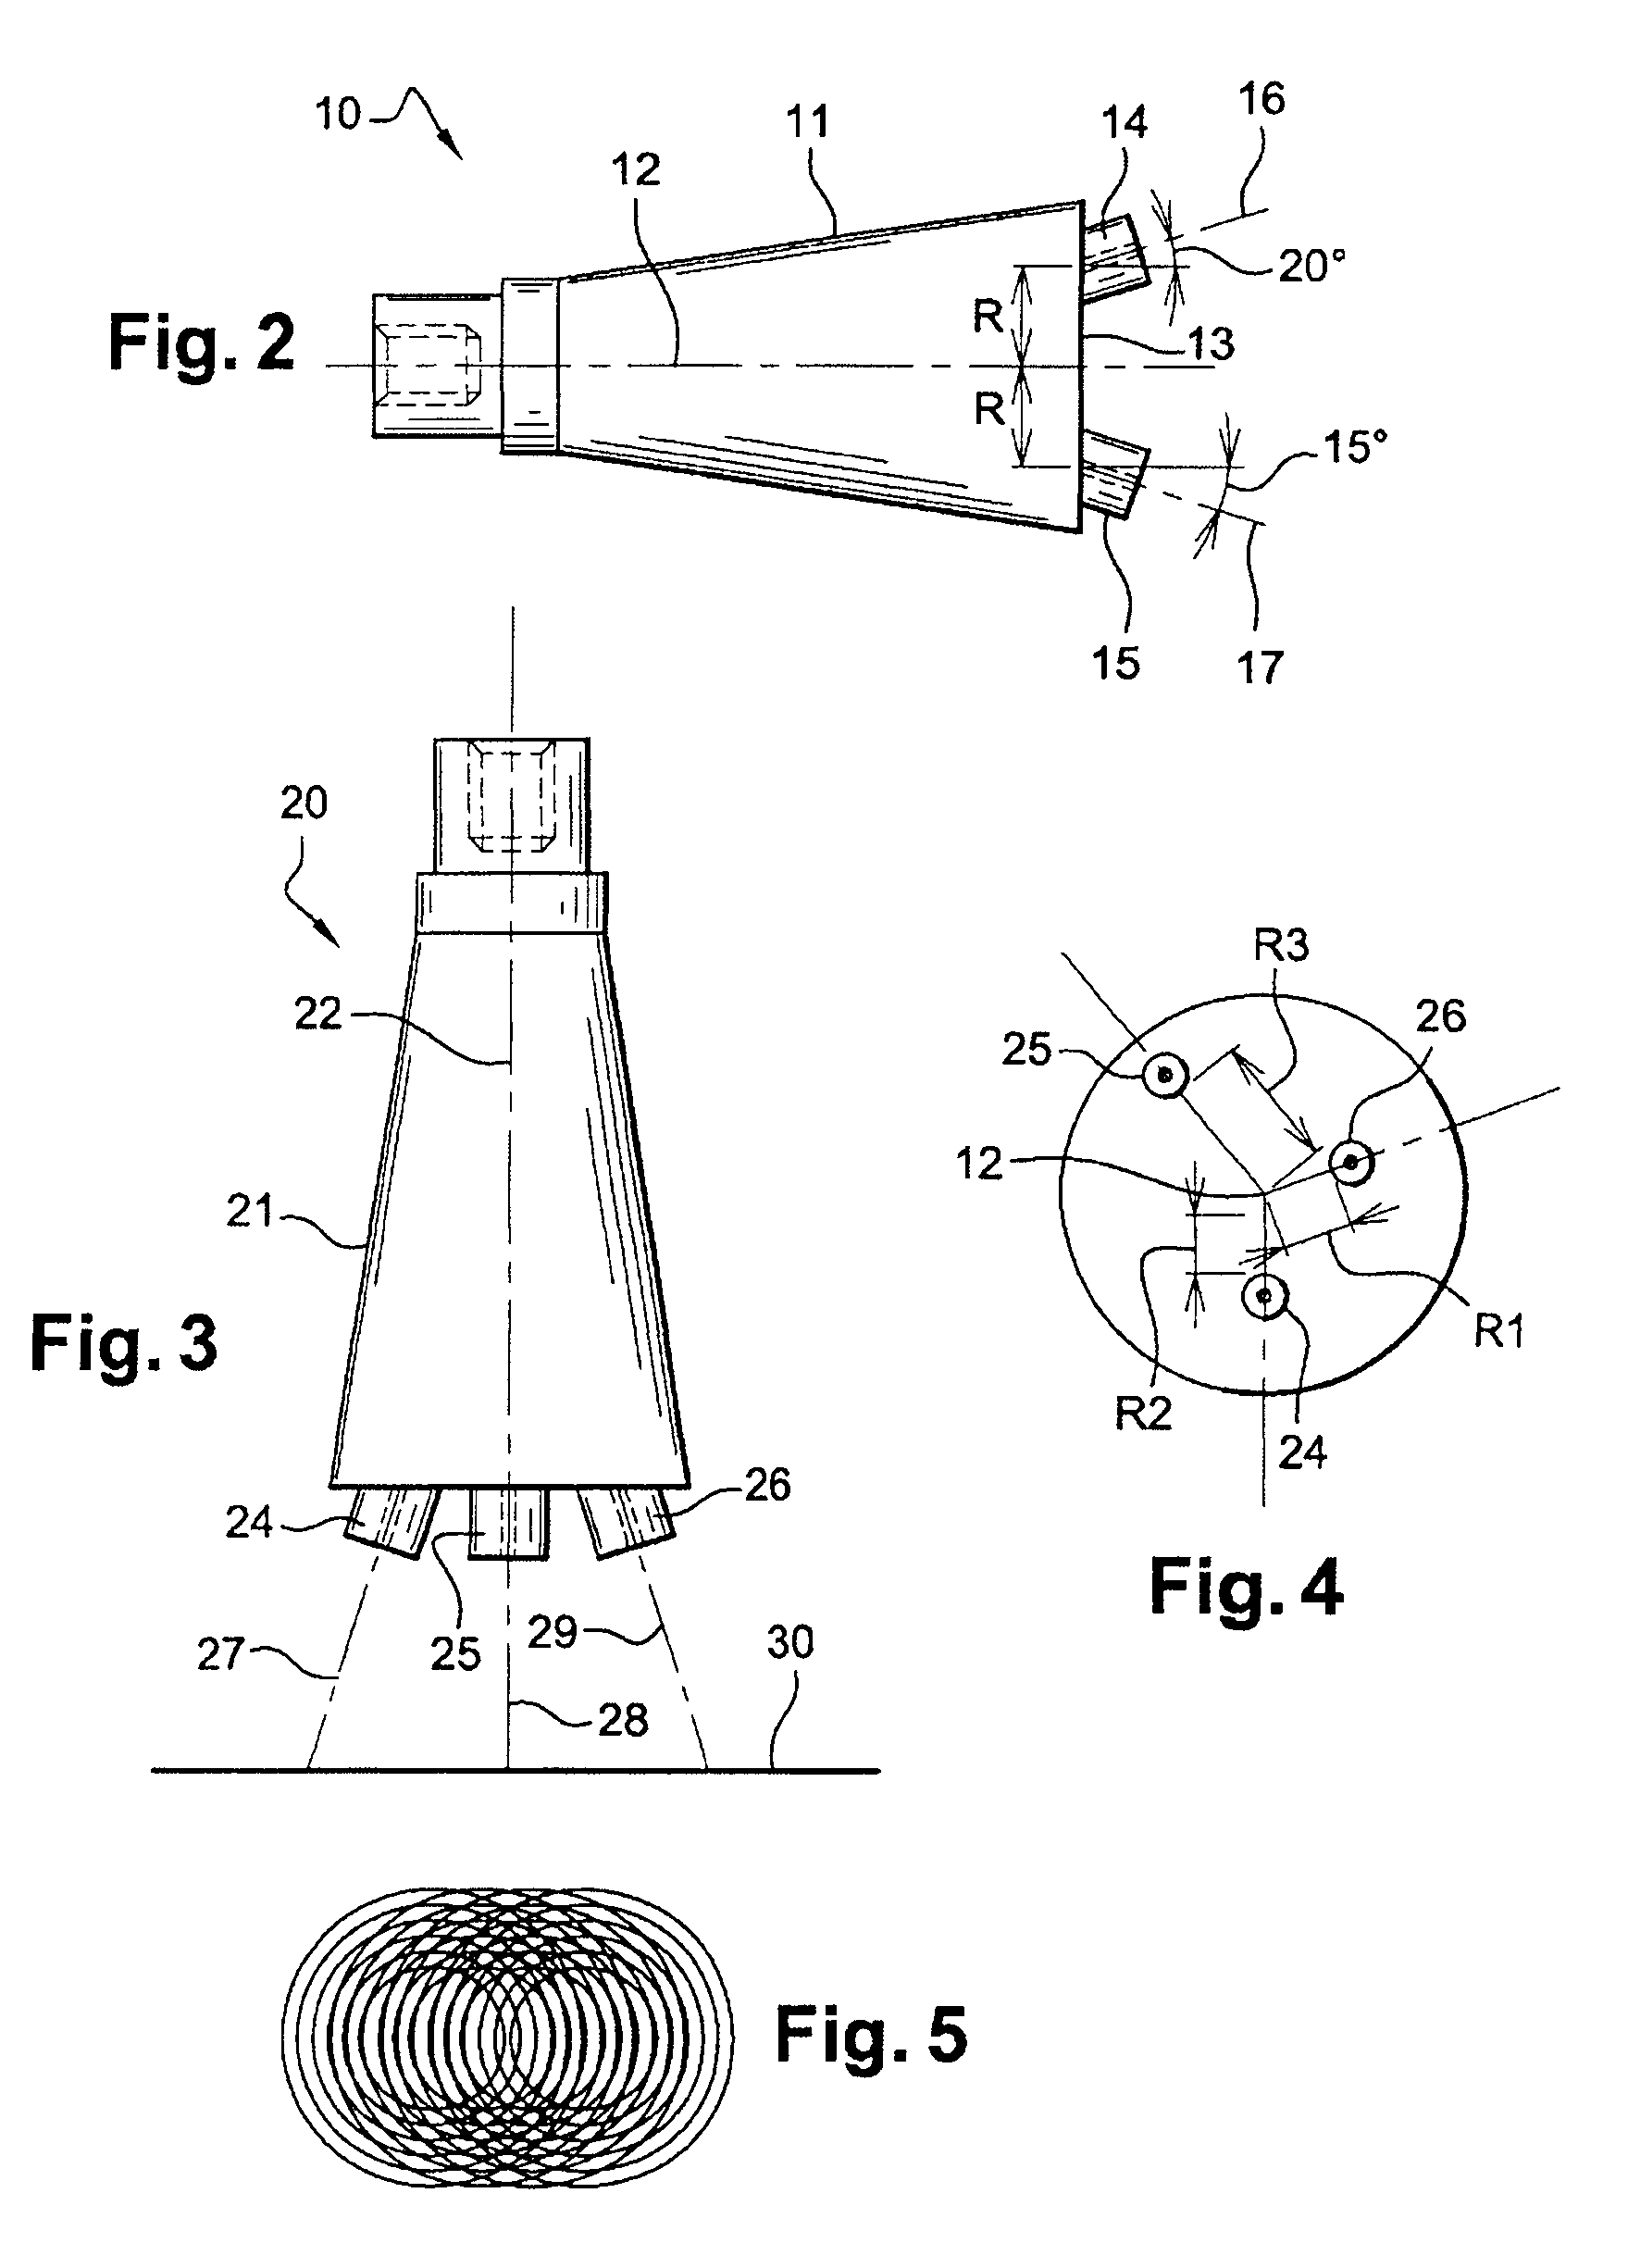 System for Recycling Used Tyres Comprising a High-Pressure Fluid Spray Head